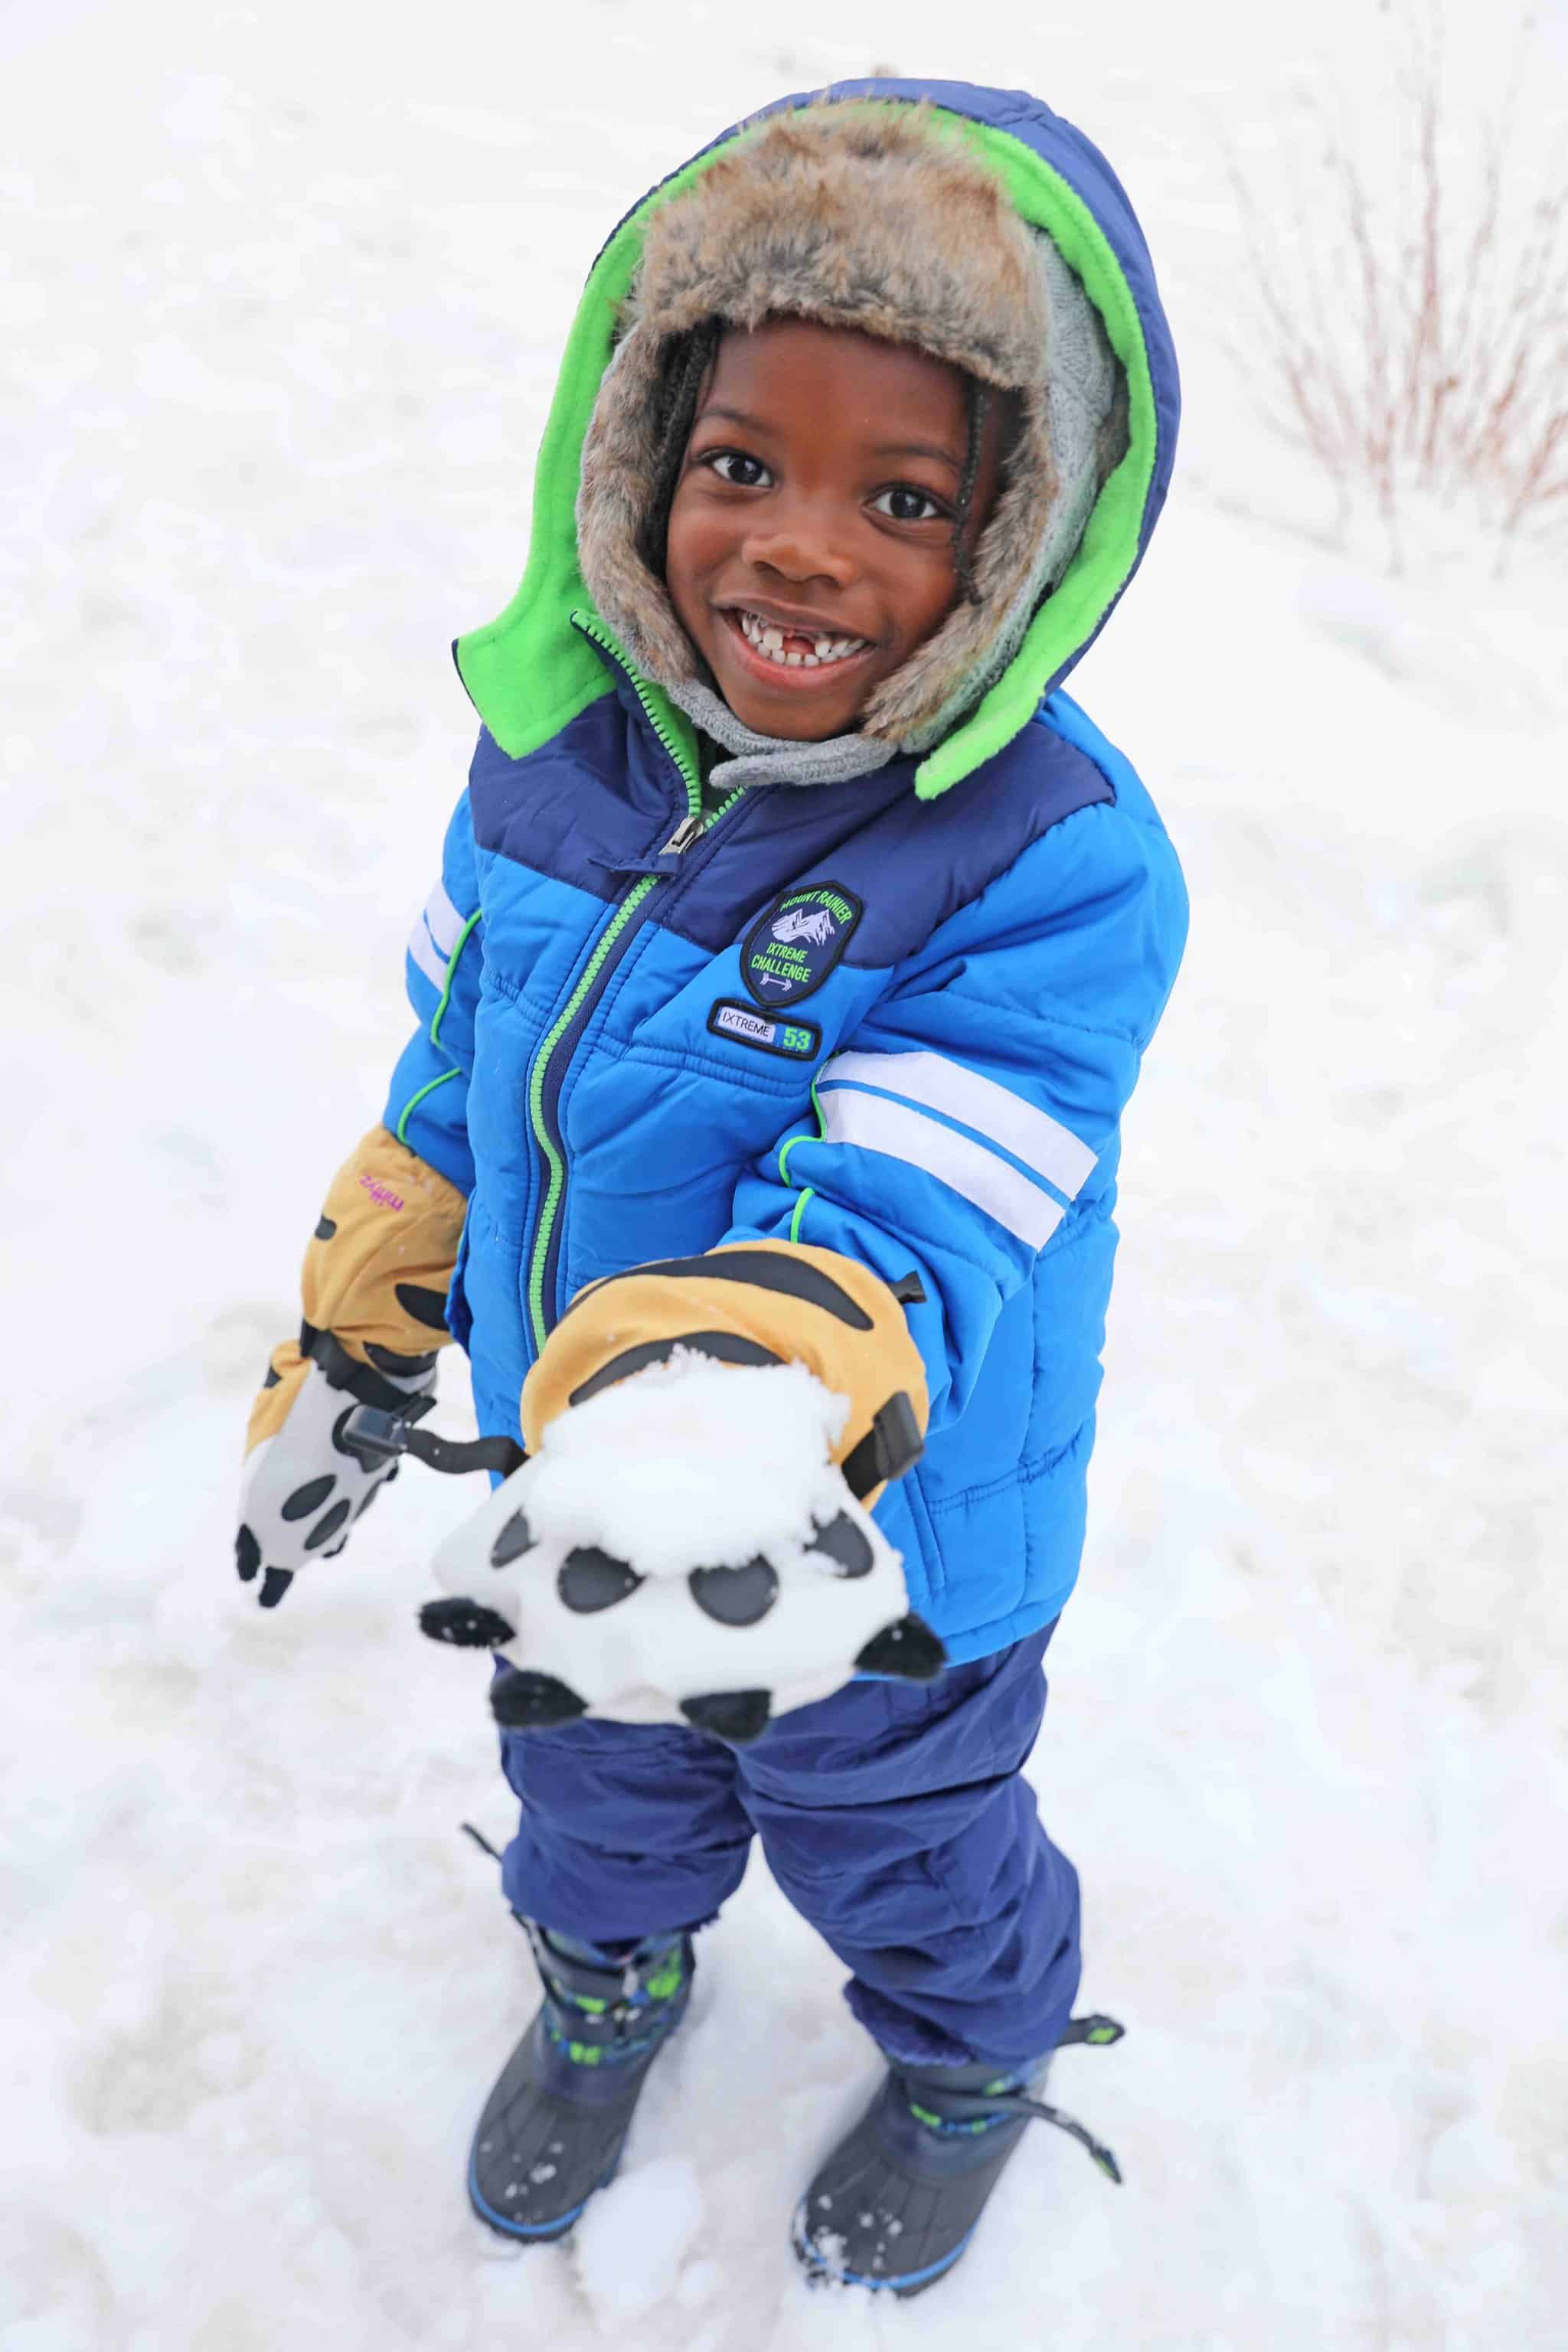 A young boy playing in the snow in his blue snowsuit keeping warm on his families snow trip